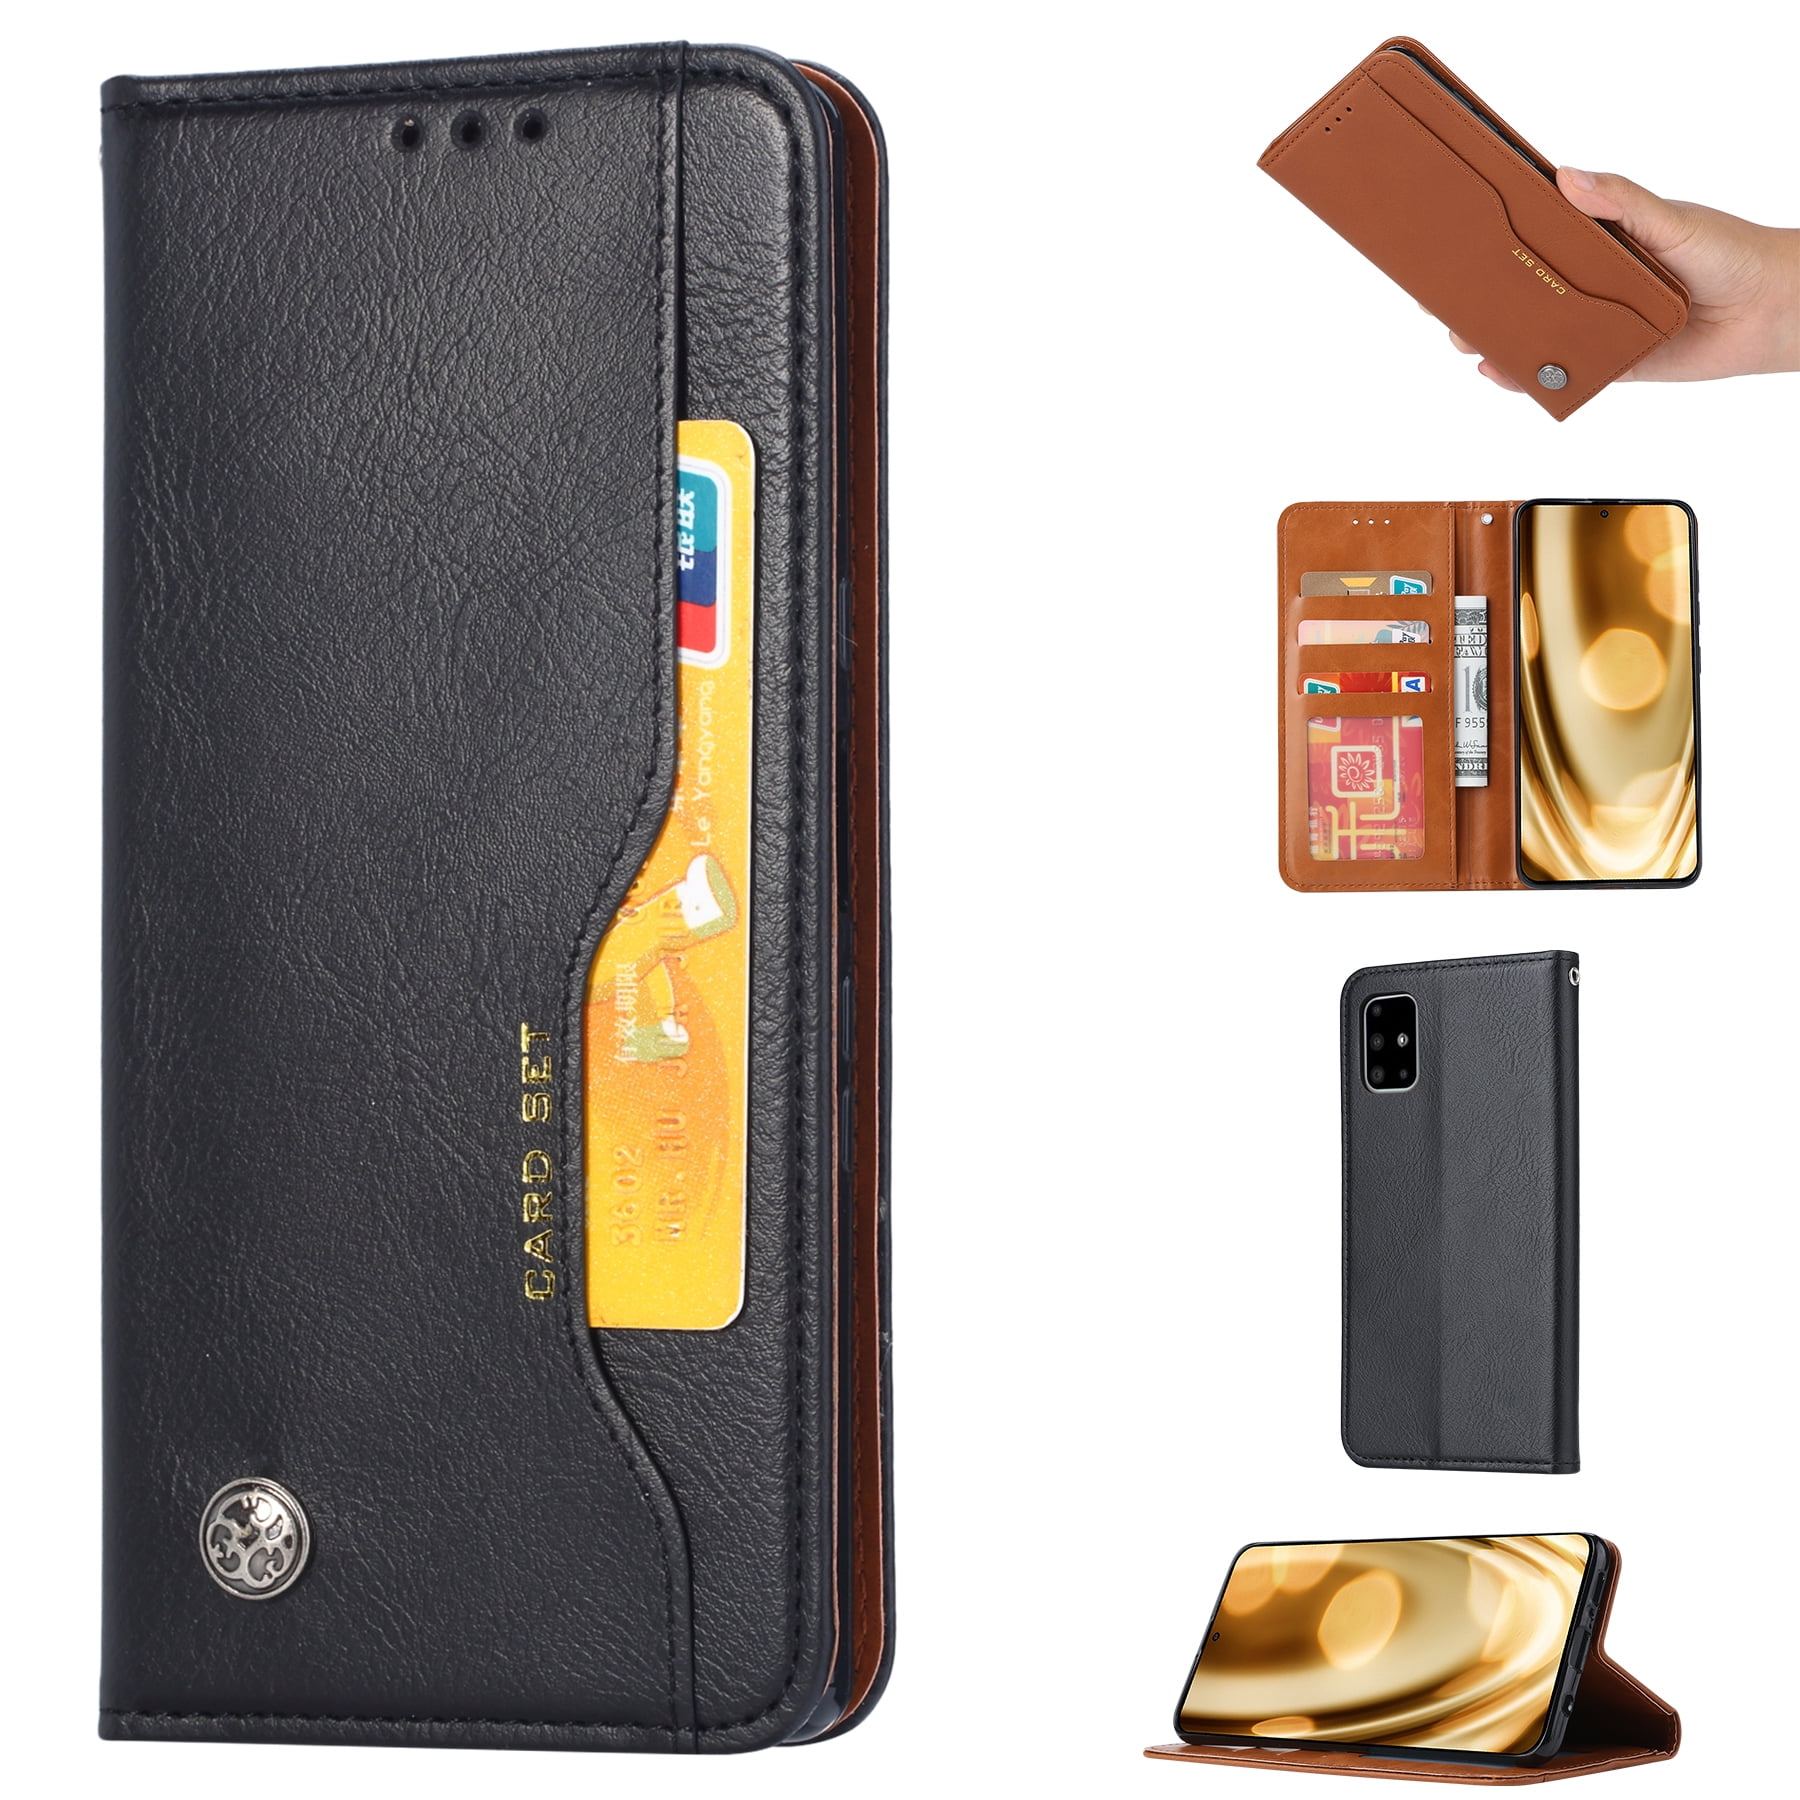 Kickstand Magnetic Closure Samsung Galaxy A10 M10 Case, Shockproof Premium Leather Wallet Case Business Design Flip Notebook Cover with TPU Inner Shell Card Holders Protective Skin yellow